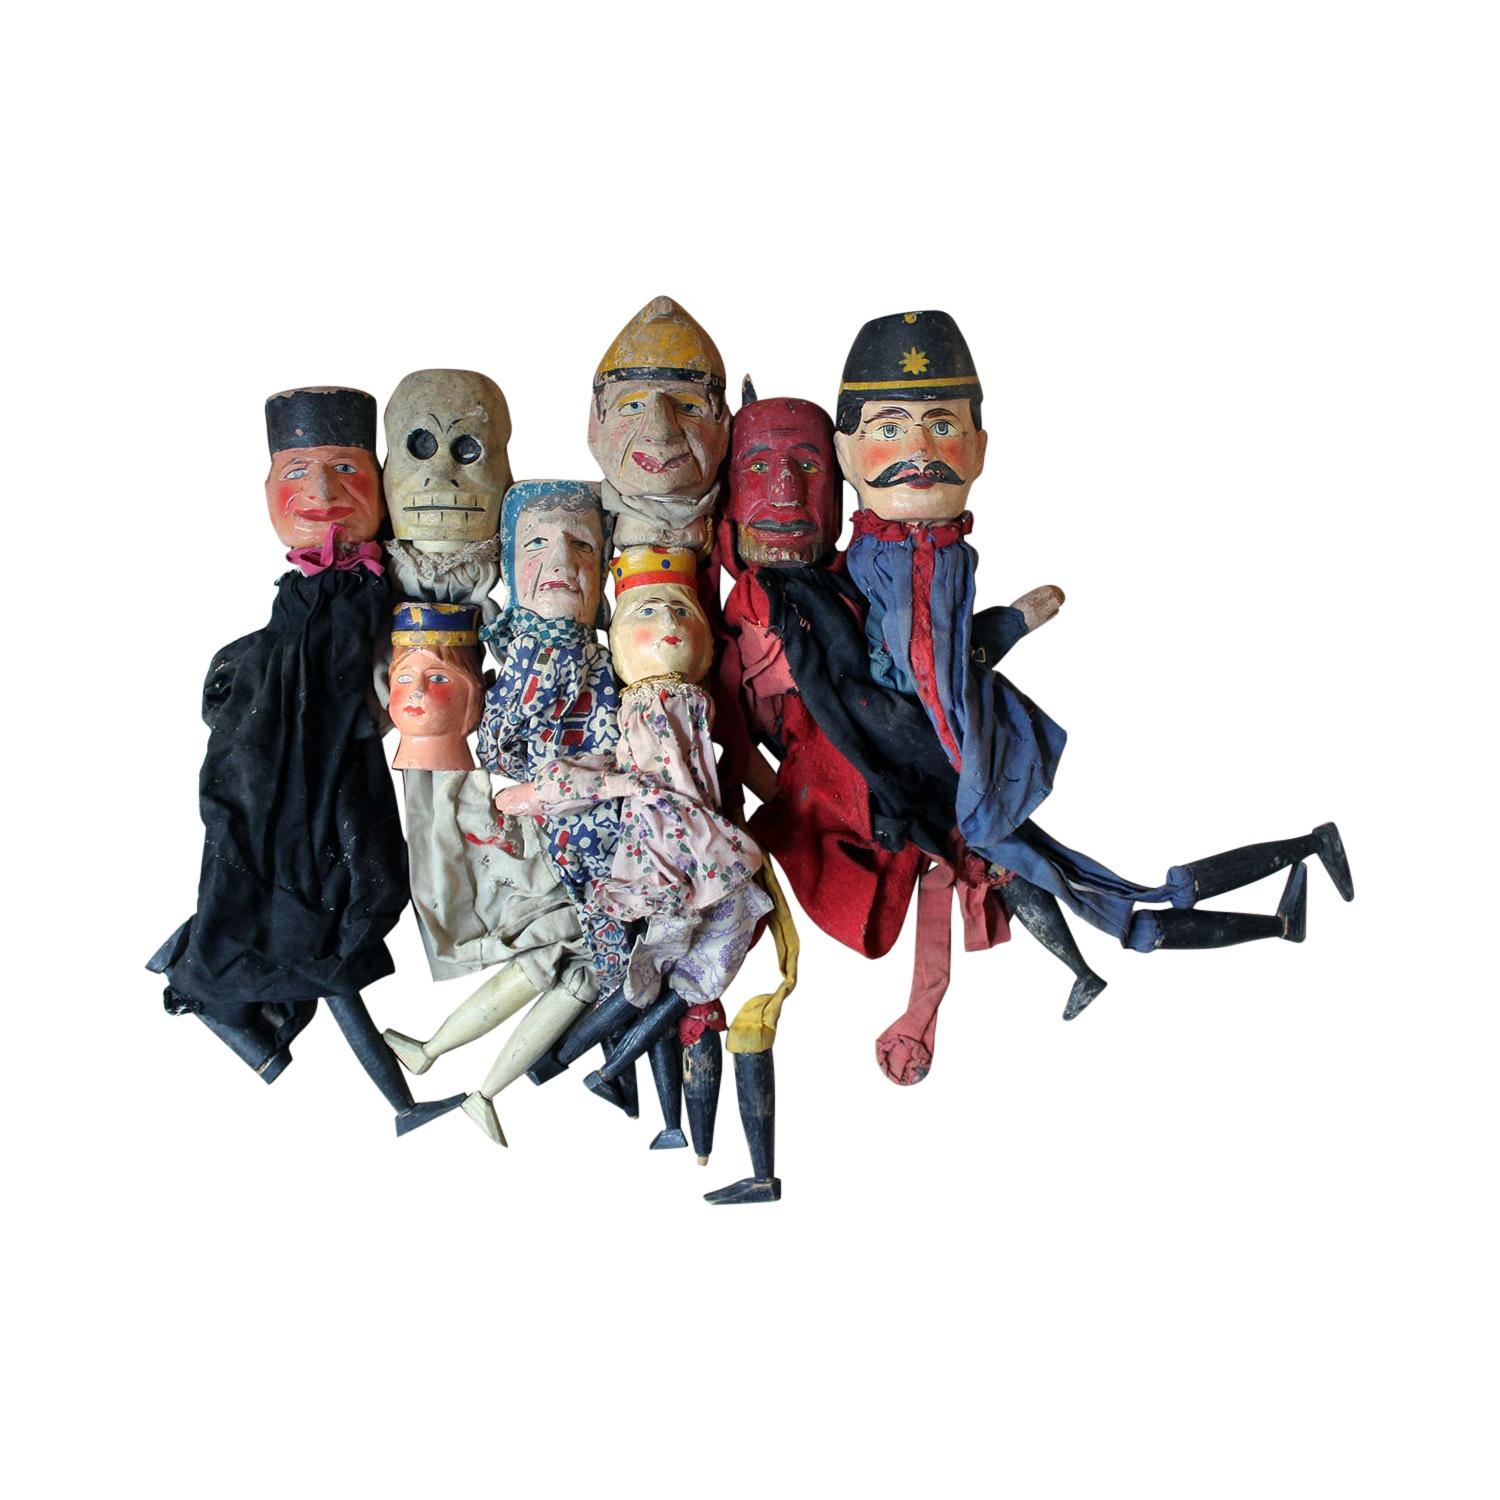 Group of Seven Late 19th Century English Folk Art Punch & Judy Finger Puppets